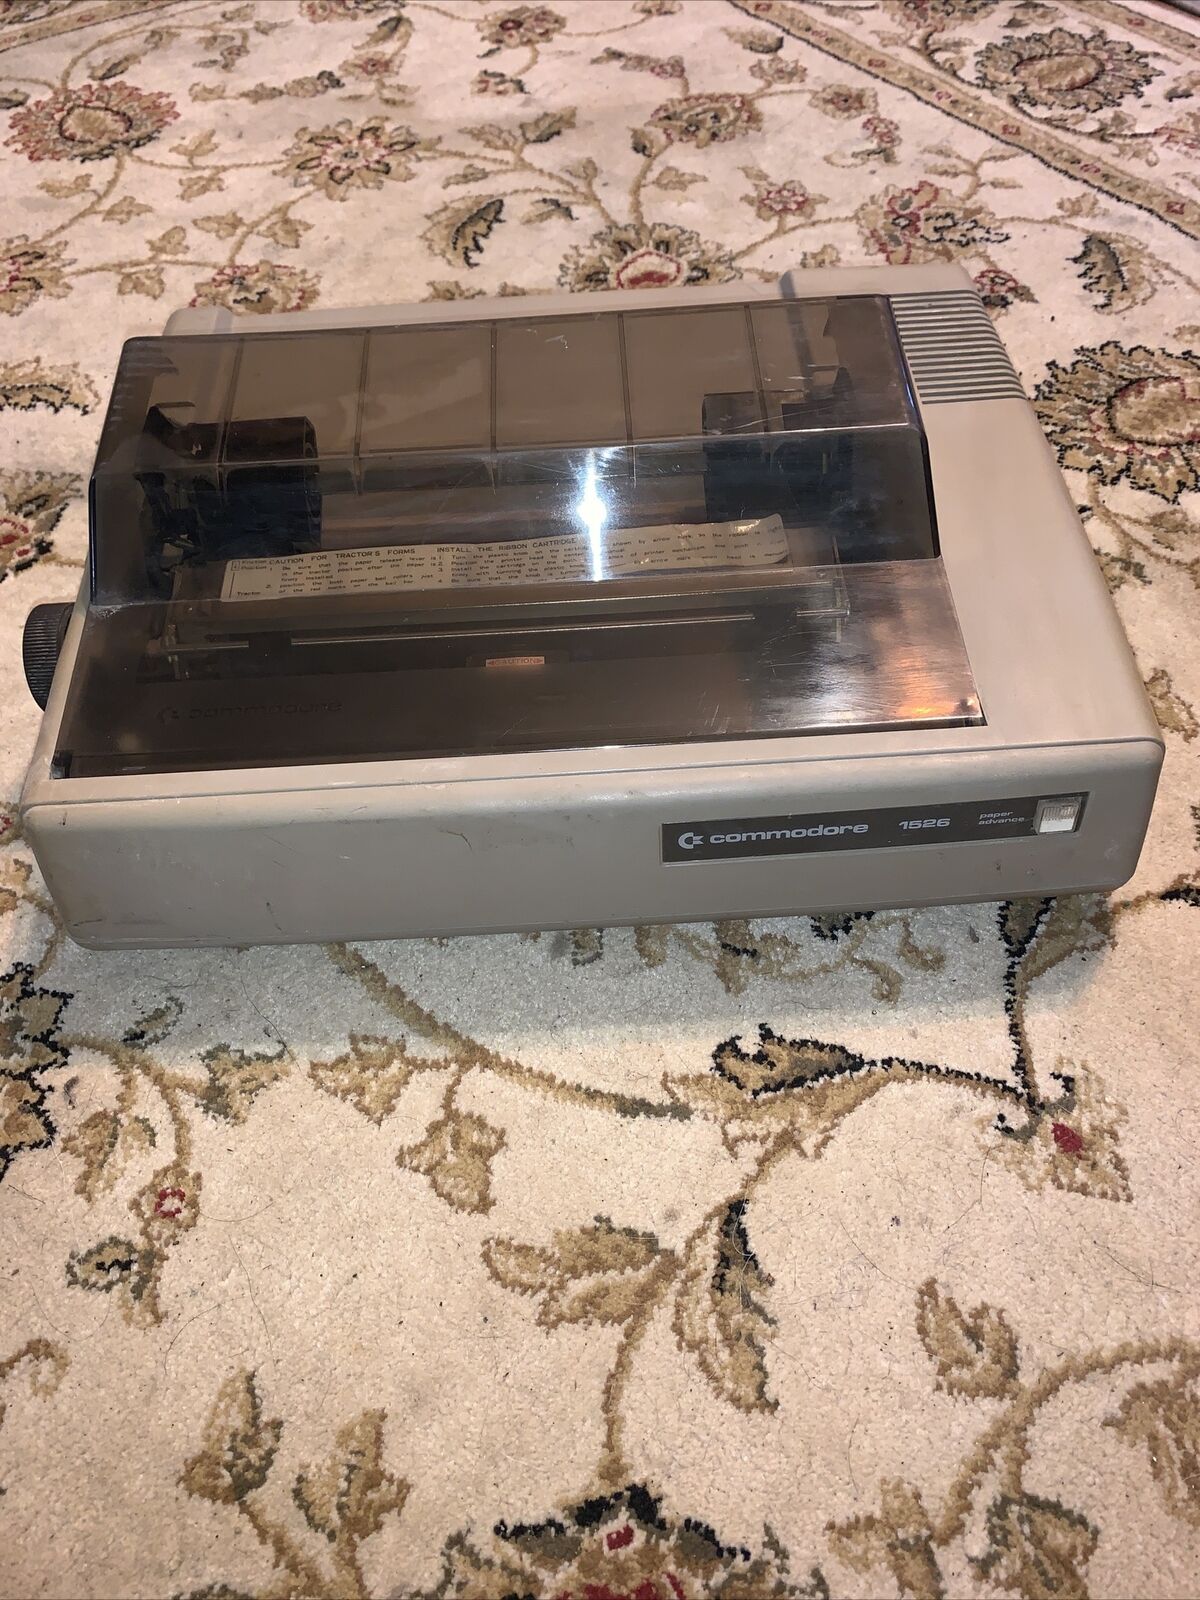 Commodore 1526 Printer + 1st & 2nd Gen Commodore 1541 Disk Drives (PACKAGE DEAL)